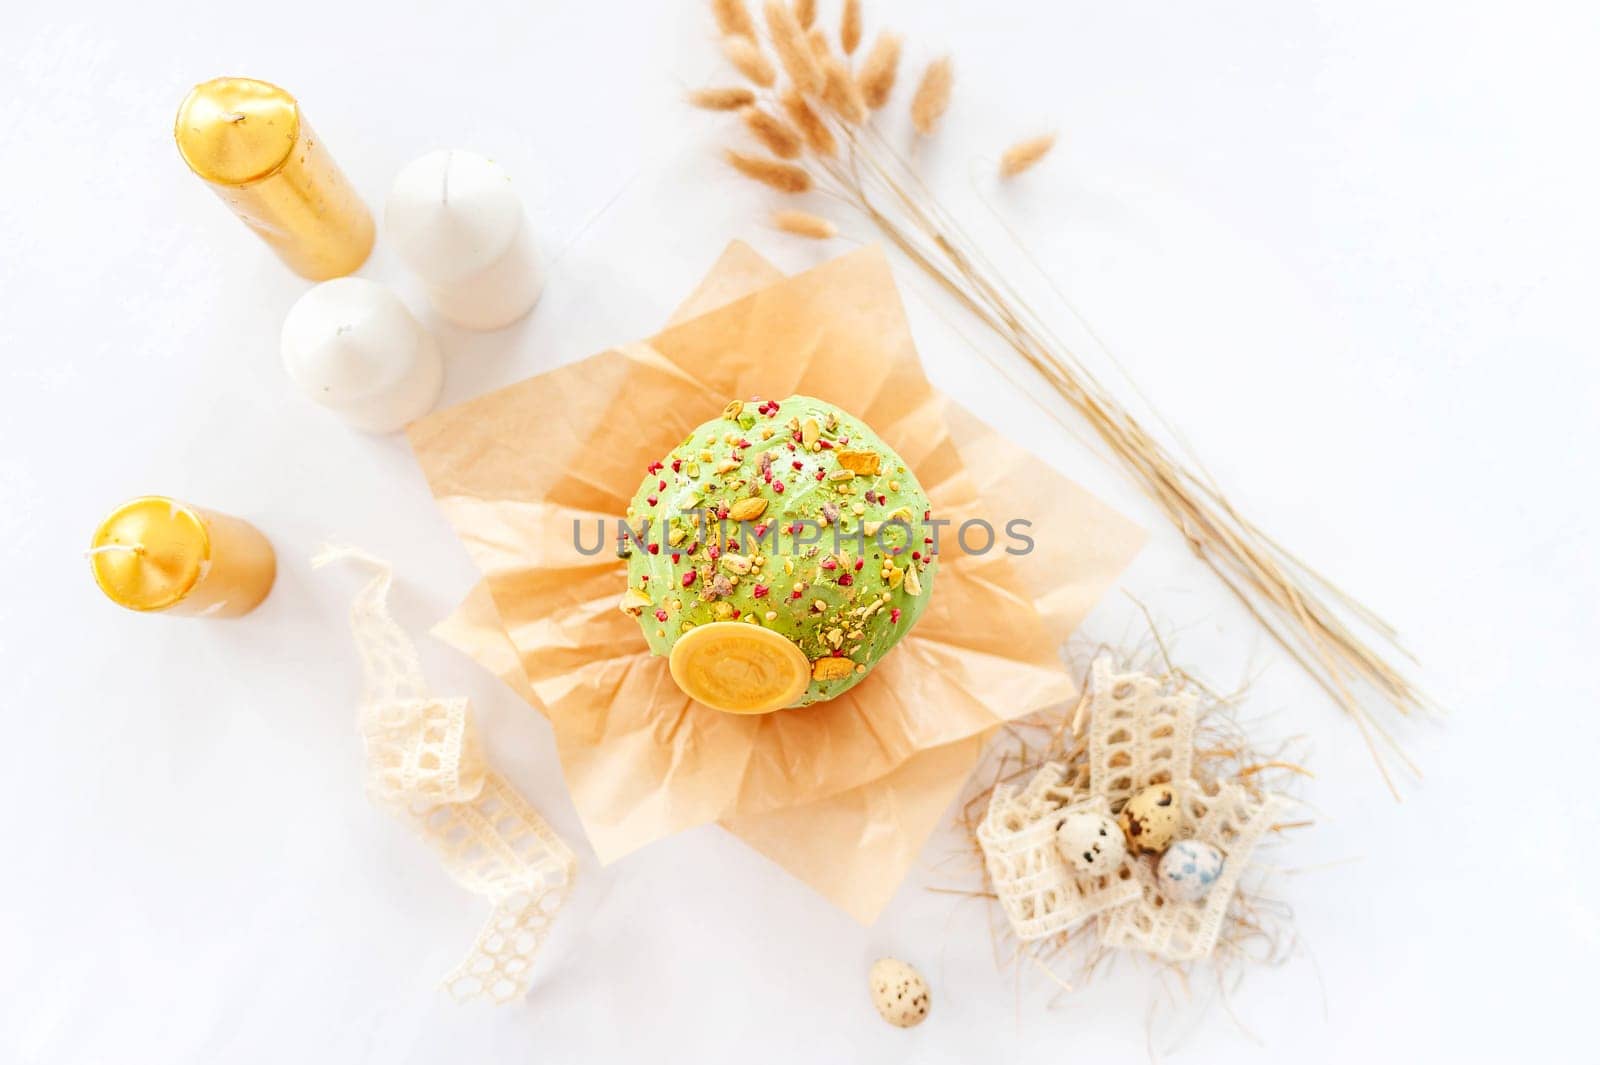 Traditional easter cake or sweet bread, quail eggs and green meringues in shape of nest over white background. Top view, close up. Easter treat, holiday symbol.